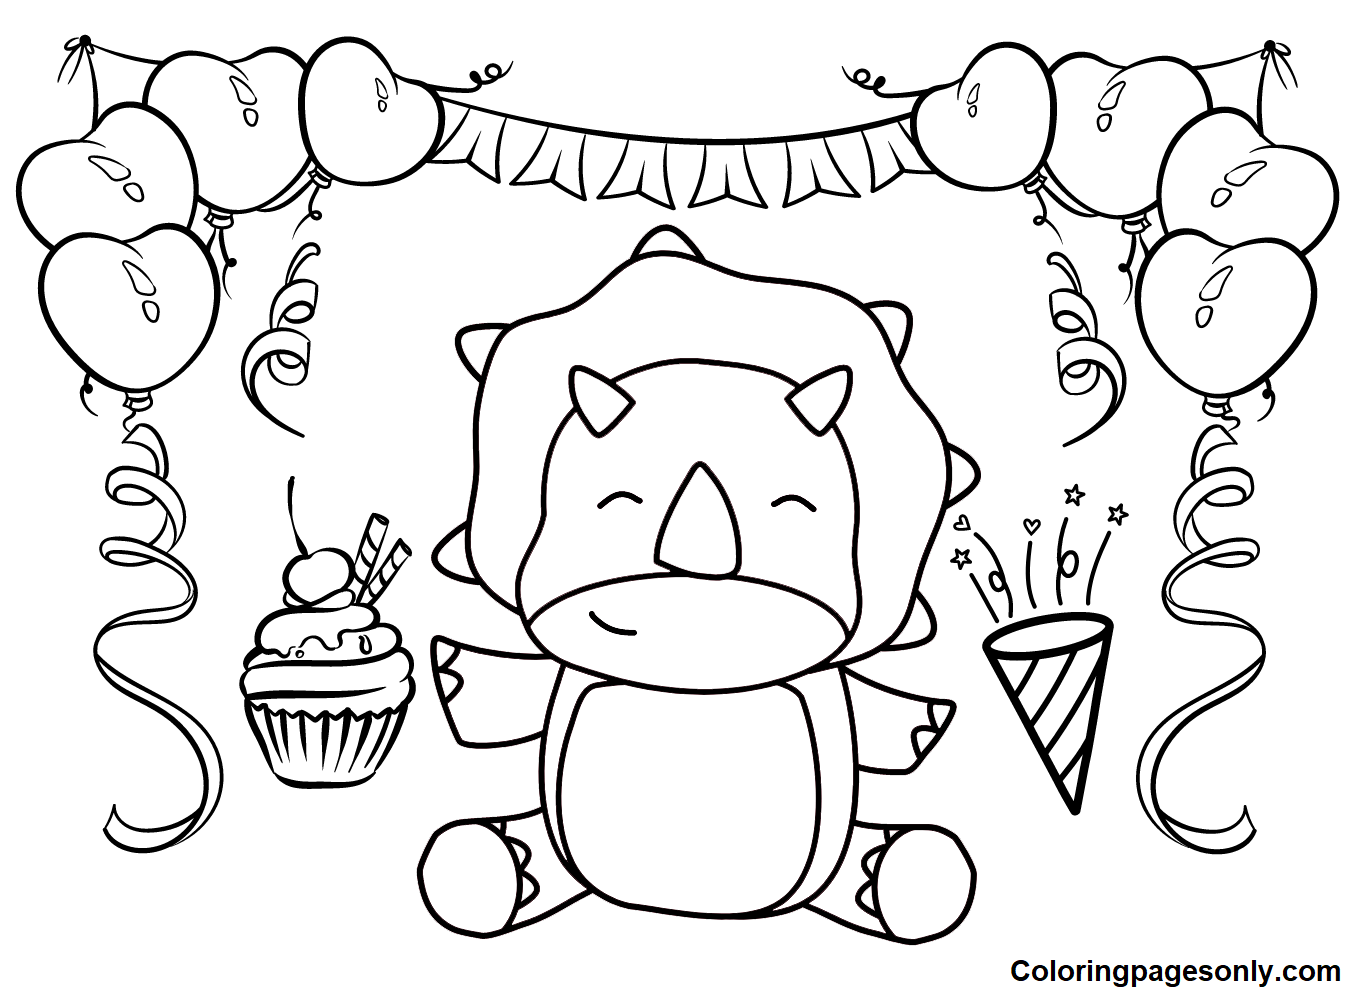 Triceratops Birthday Coloring Pages